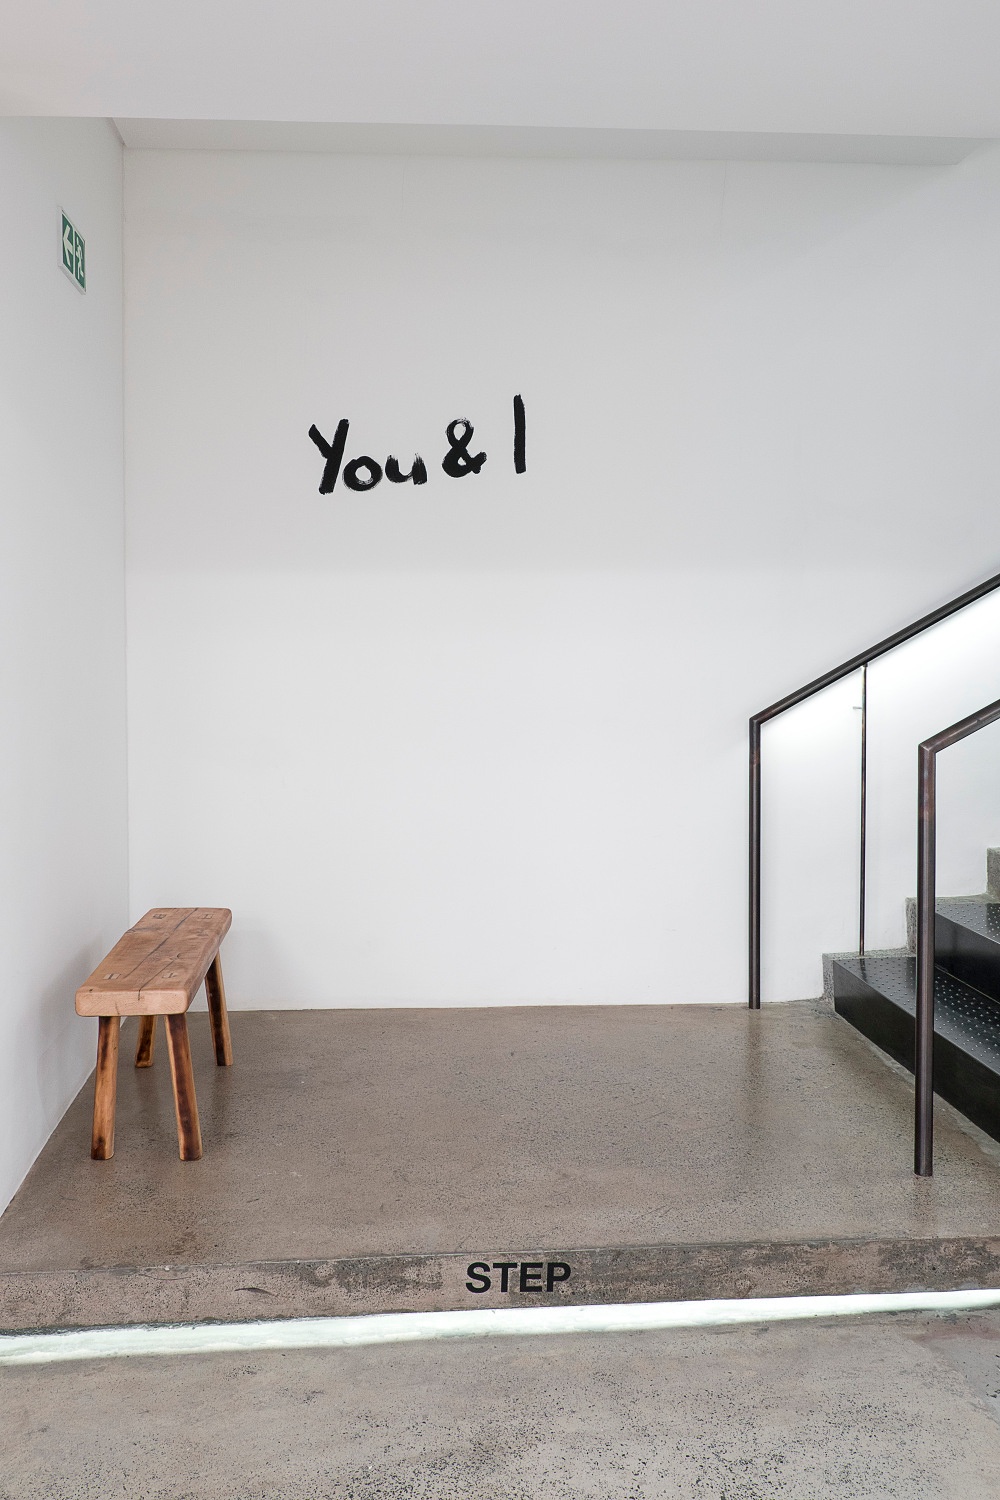 Installation photograph from the You & I exhibition in A4’s Gallery. On the ground floor, the exhibition title ‘You & I’ is painted on a wall at the base of the stairway in black paint.
